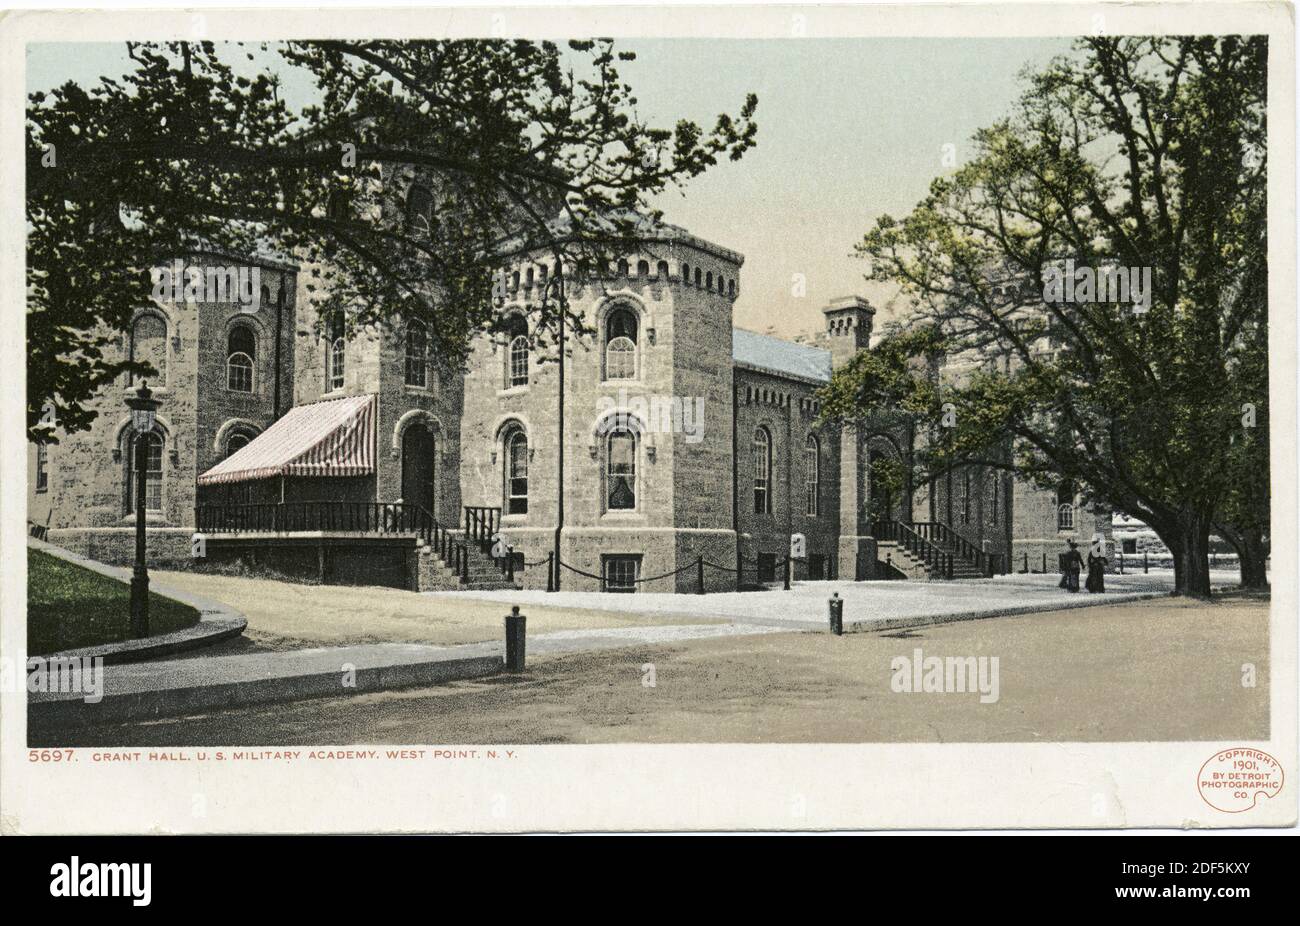 Grant Hall, U. S. Military Academy, West Point New York, N. Y., still image, Postcards, 1898 - 1931 Stock Photo